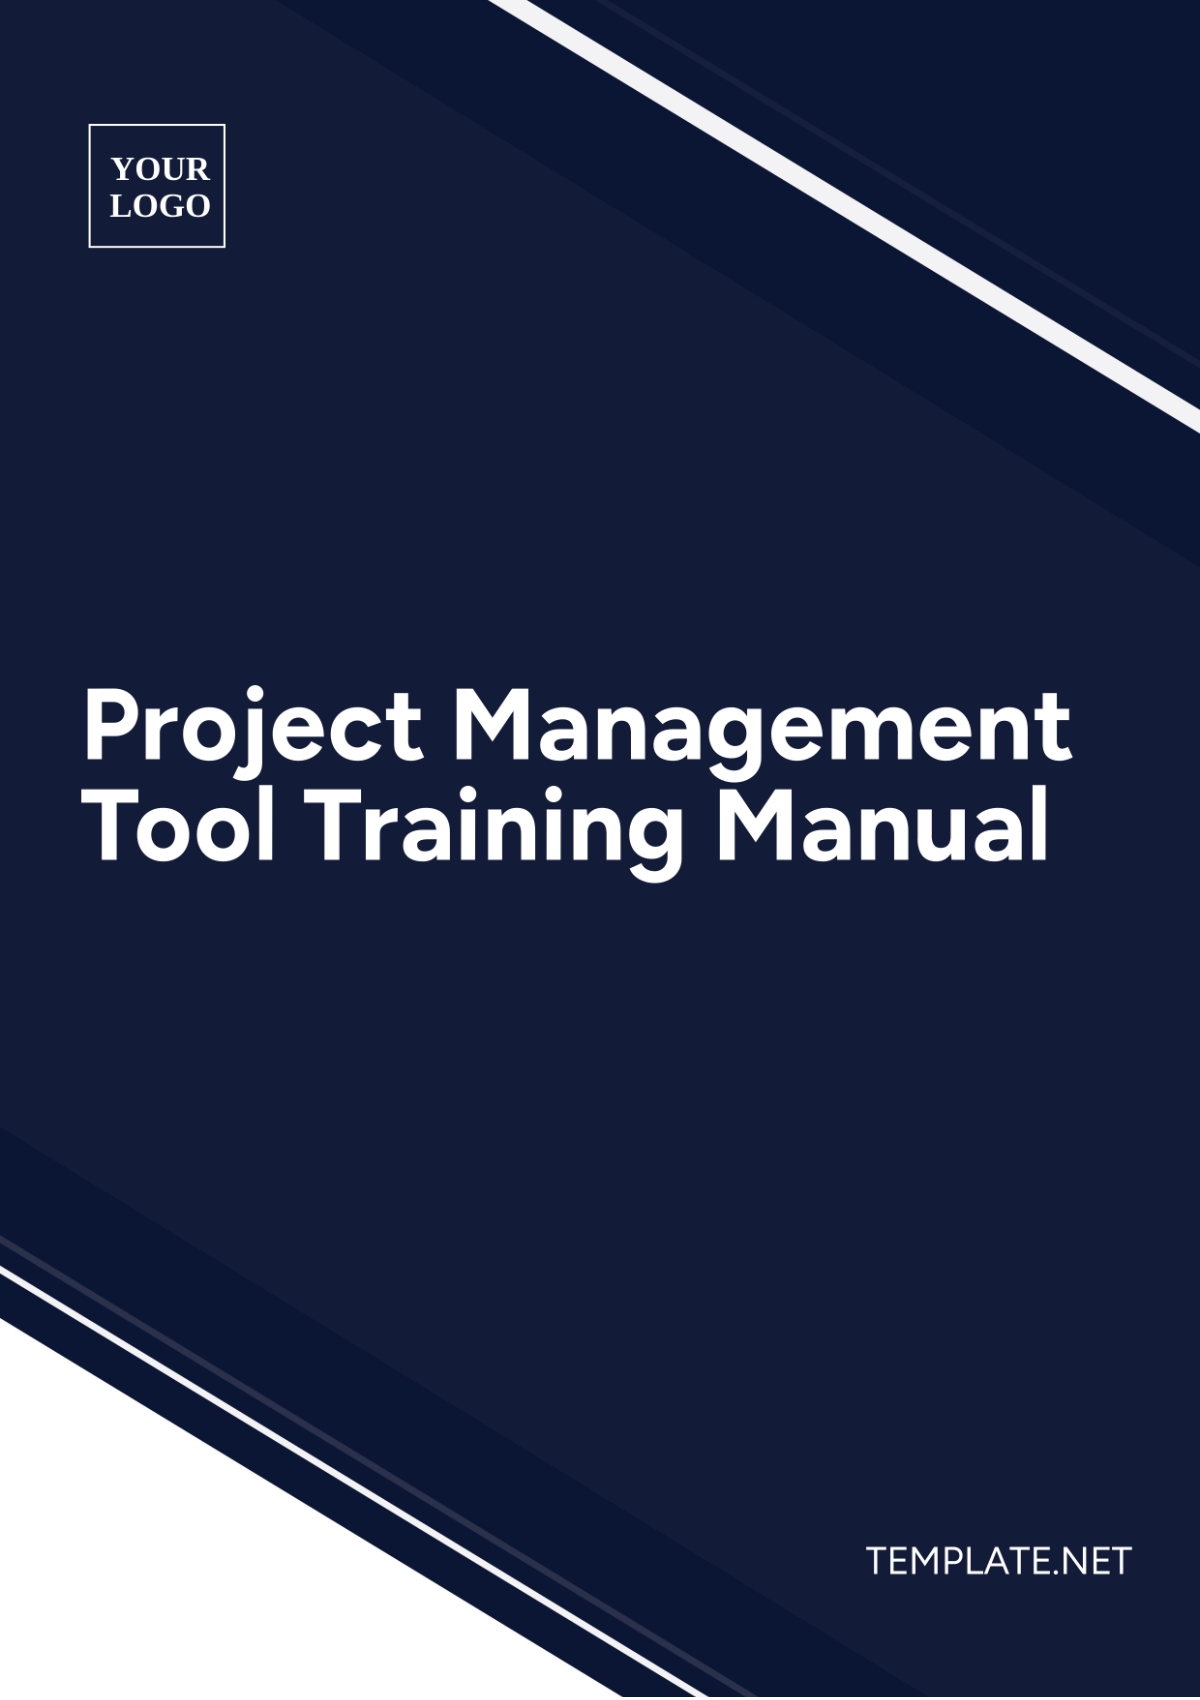 Project Management Tool Training Manual Template